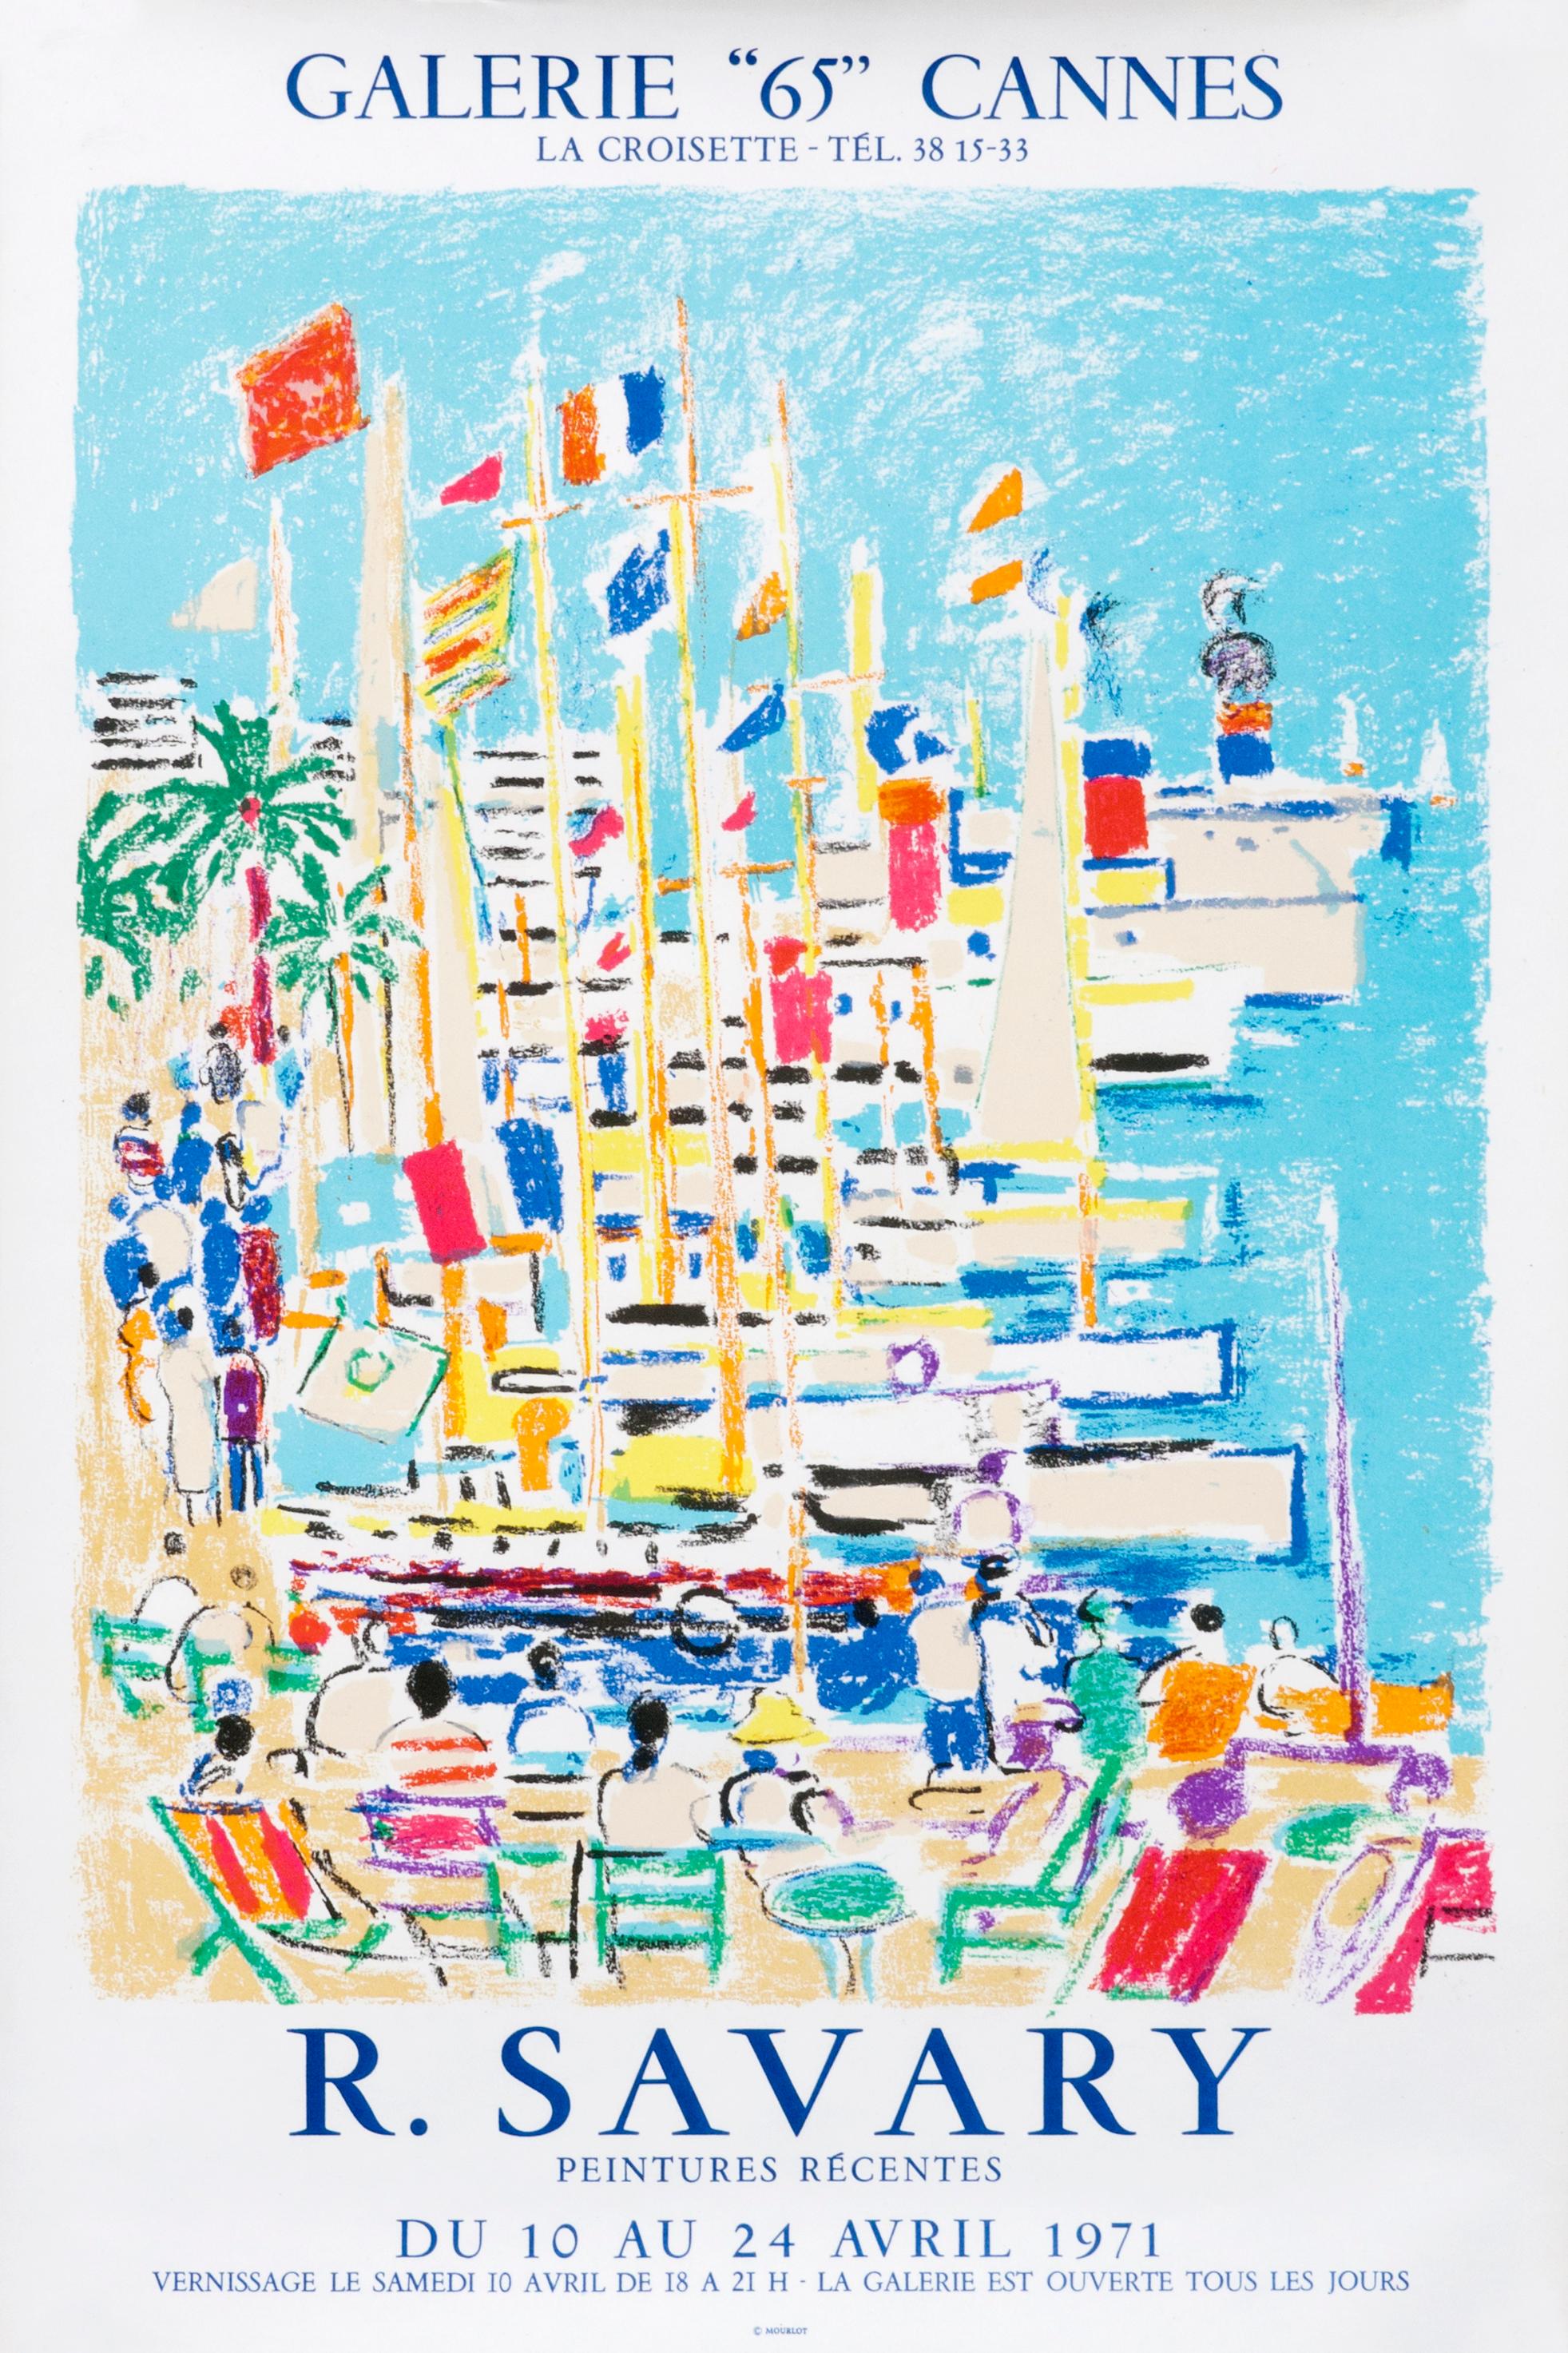 Robert Savary Landscape Print - "R. Savary Peintures Recentes - Galerie 65 Cannes" French sailing poster